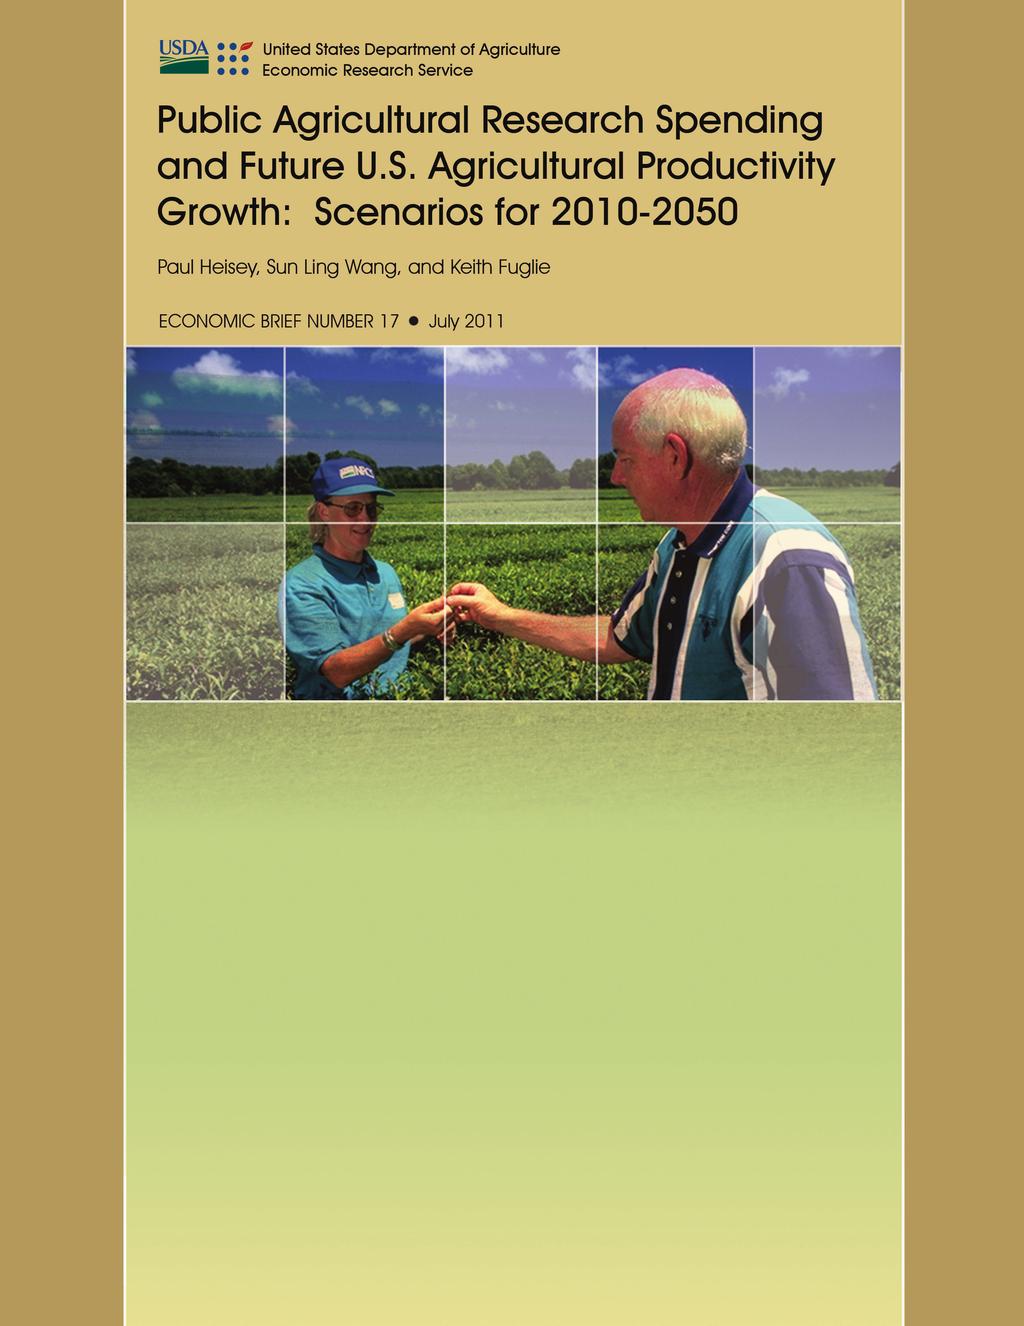 Major Findings By 2050, global agricultural demand is projected to grow by 70-100 percent due to population growth, energy demands, and higher incomes in developing countries.